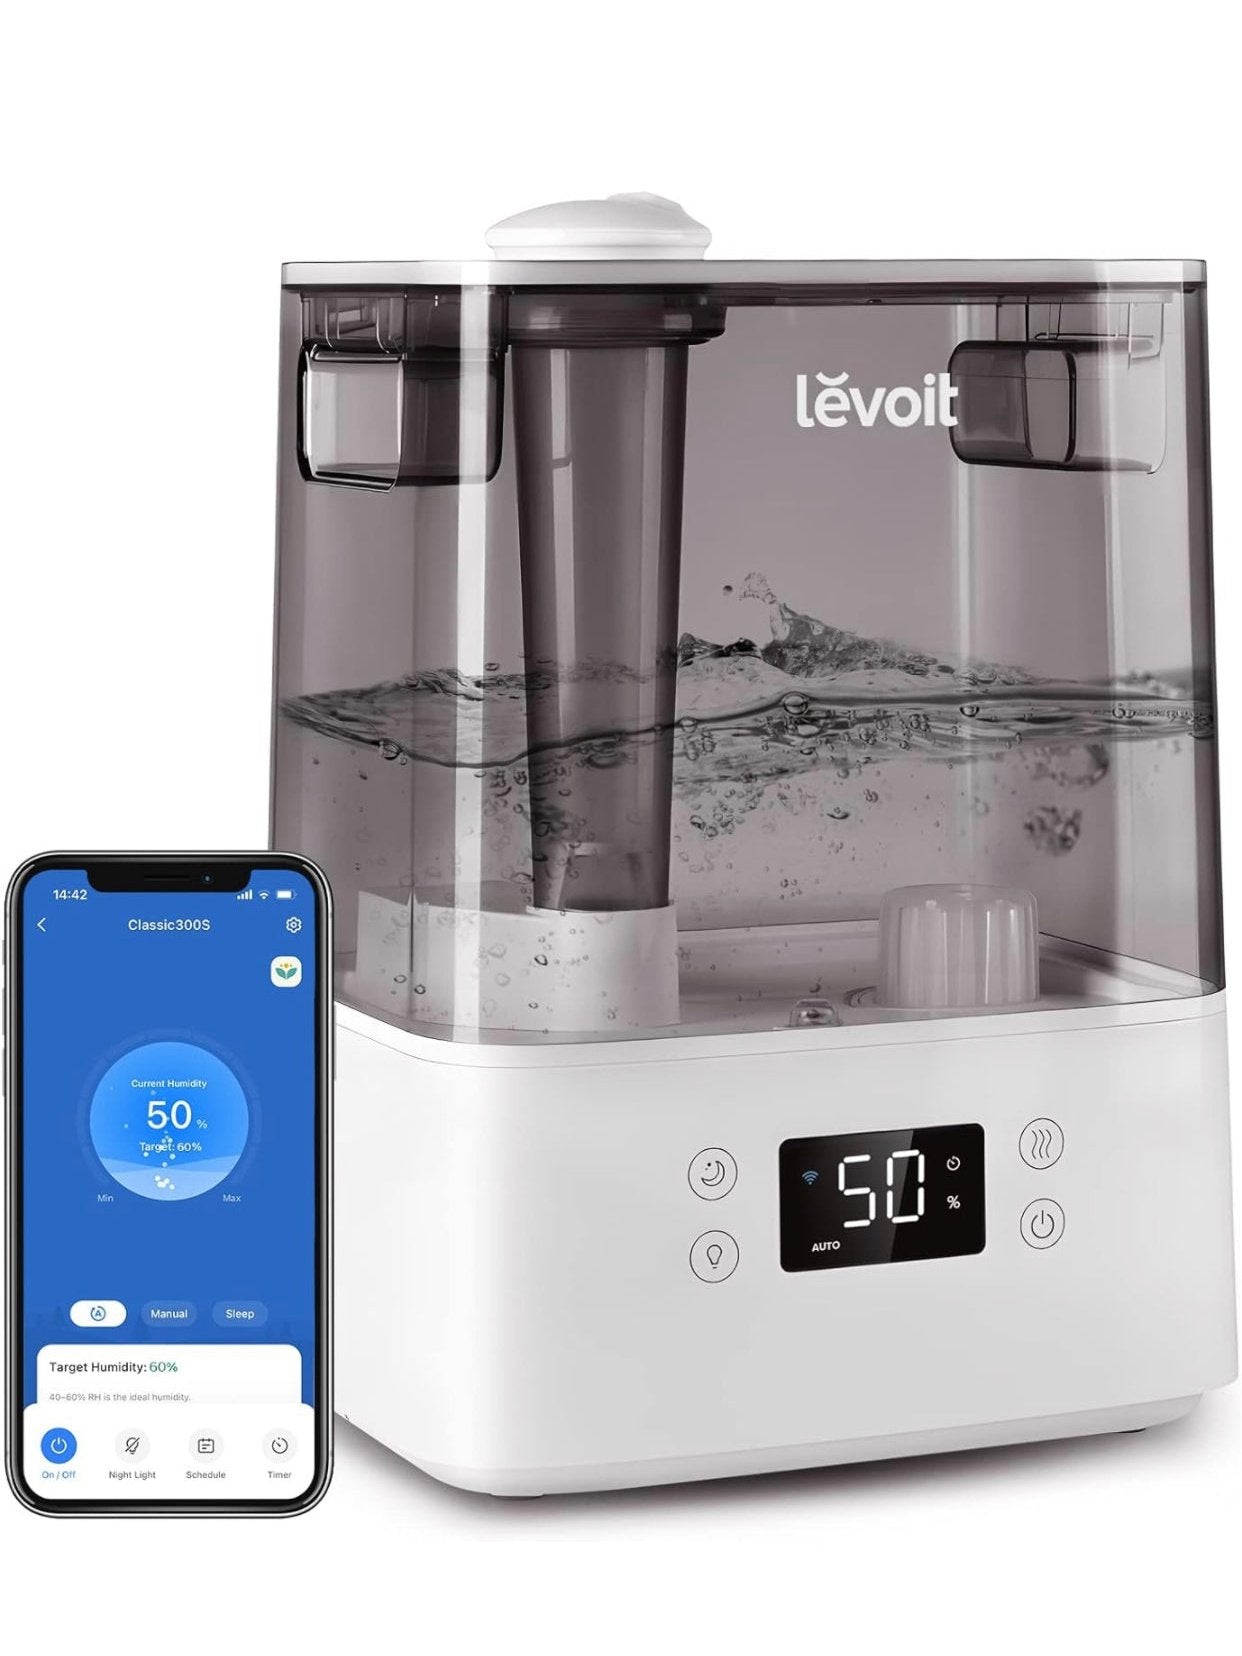 LEVOIT Humidifiers for Bedroom Large Room Home, 6L Cool Mist Top Fill Essential Oil Diffuser for Baby & Plants, Smart App & Voice Control, Rapid Humidification & Auto Mode - Quiet Sleep Mode, Gray